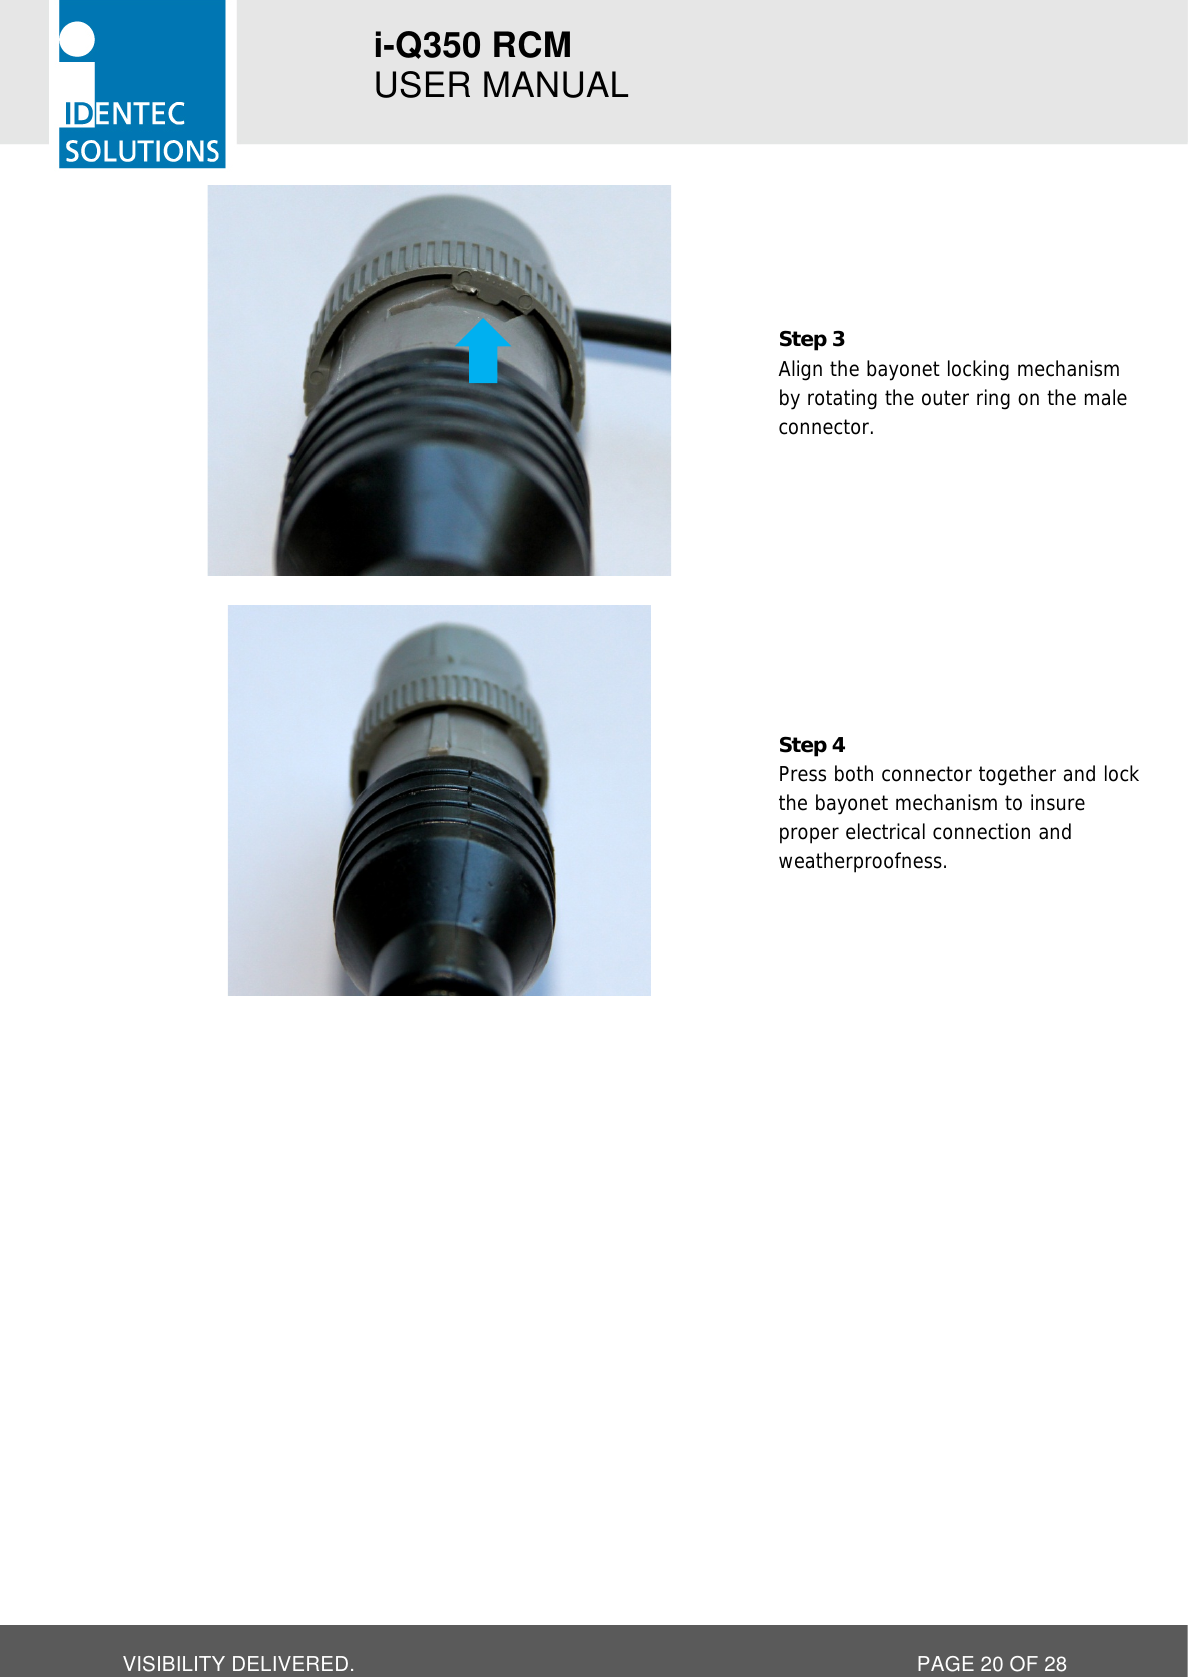 i-Q350 RCM   USER MANUAL  VISIBILITY DELIVERED.  PAGE 20 OF 28  Step 3 Align the bayonet locking mechanism by rotating the outer ring on the male connector.    Step 4 Press both connector together and lock the bayonet mechanism to insure proper electrical connection and weatherproofness.   